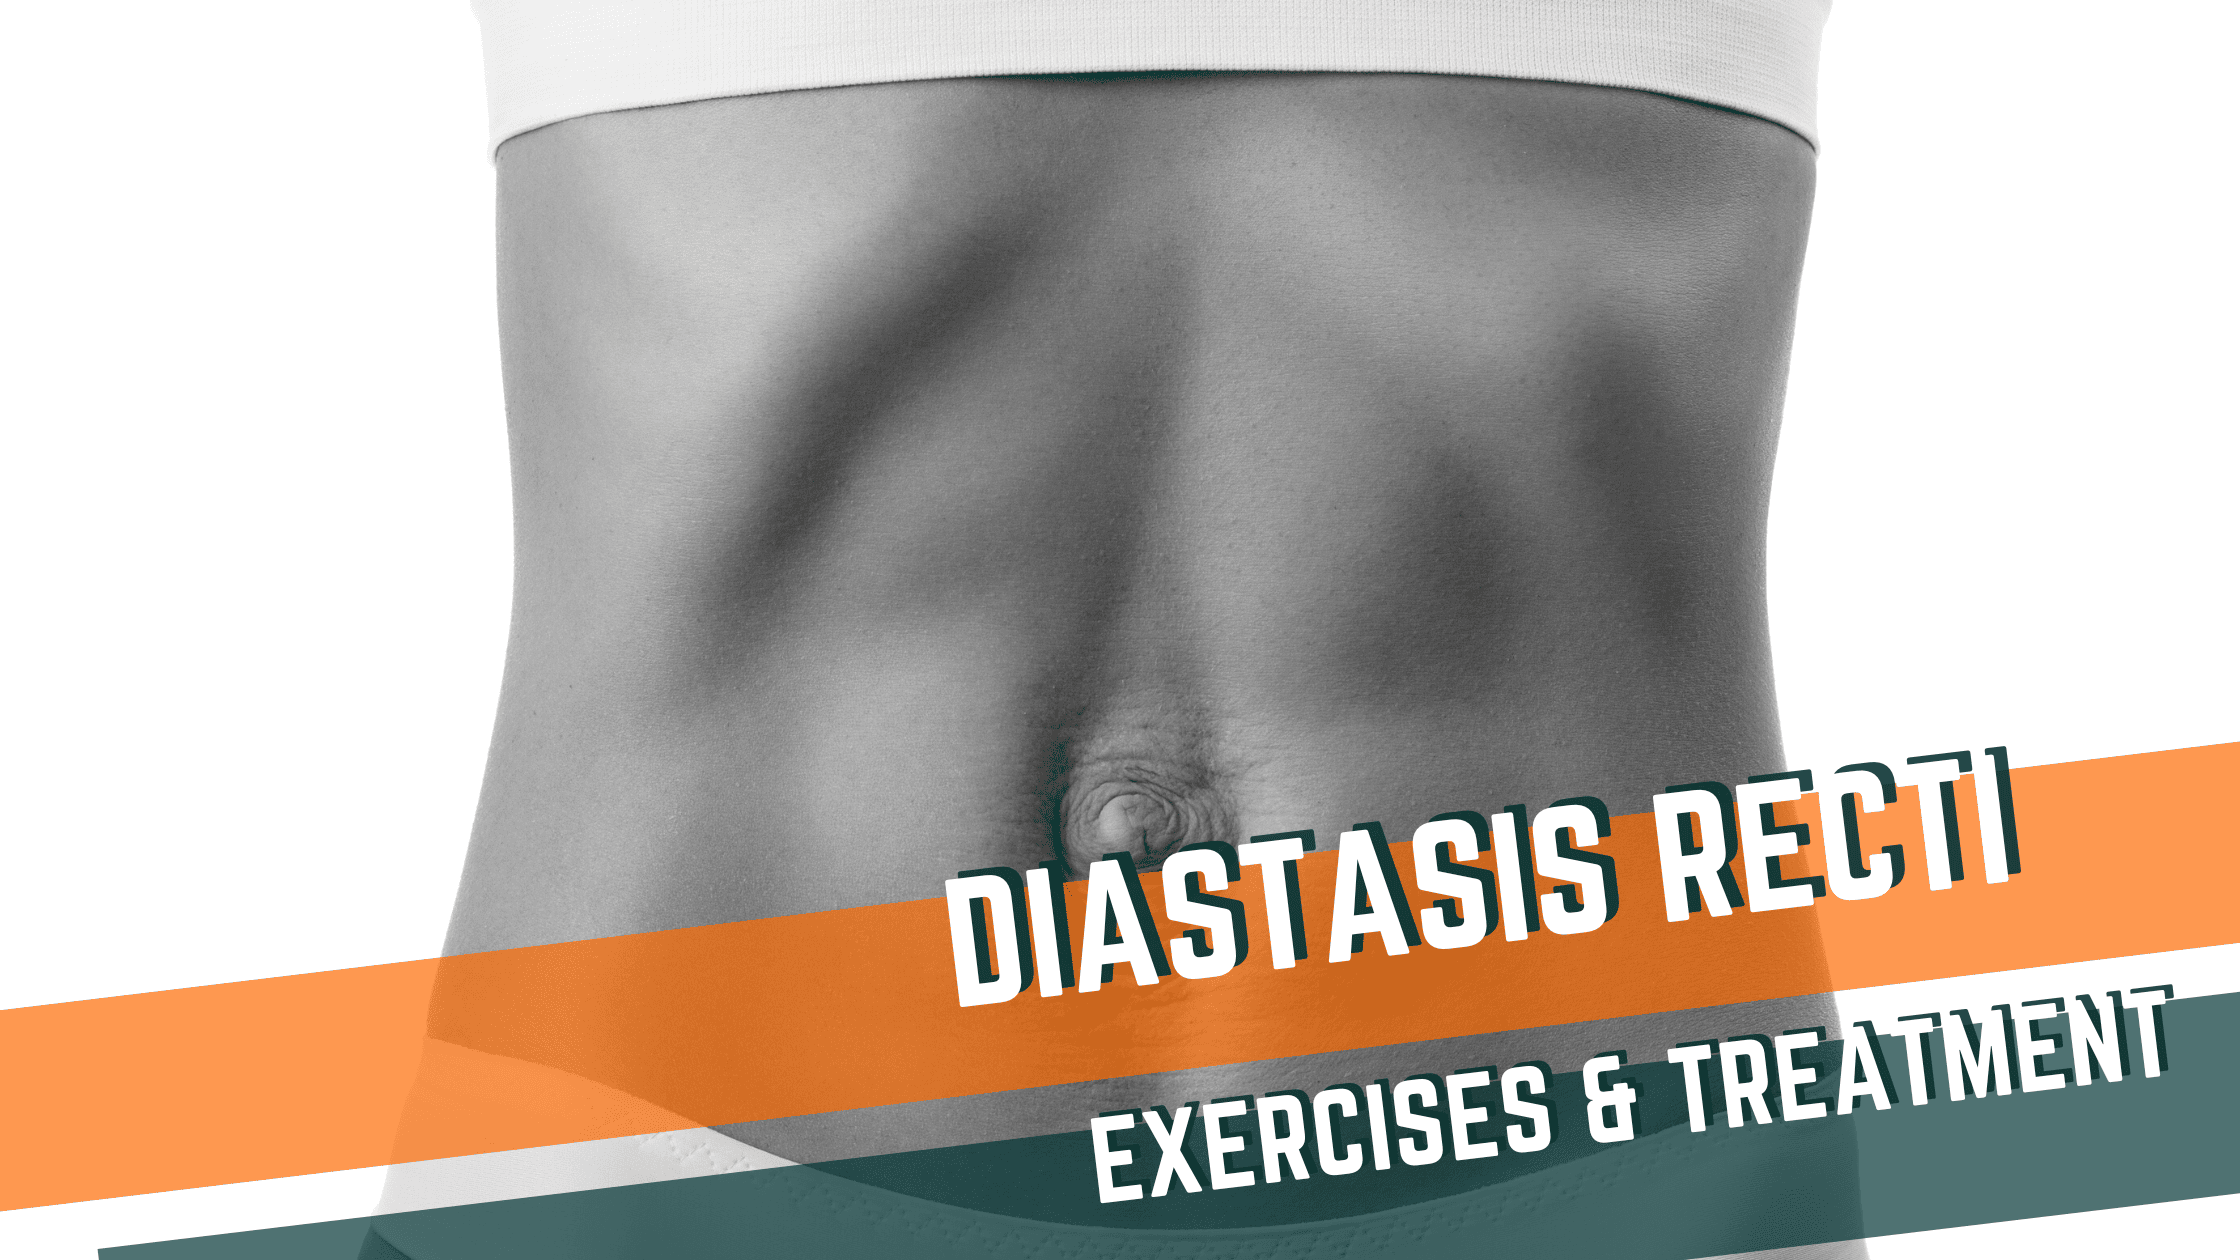 Featured image for “Diastasis Recti? A sign you need to get stronger.”